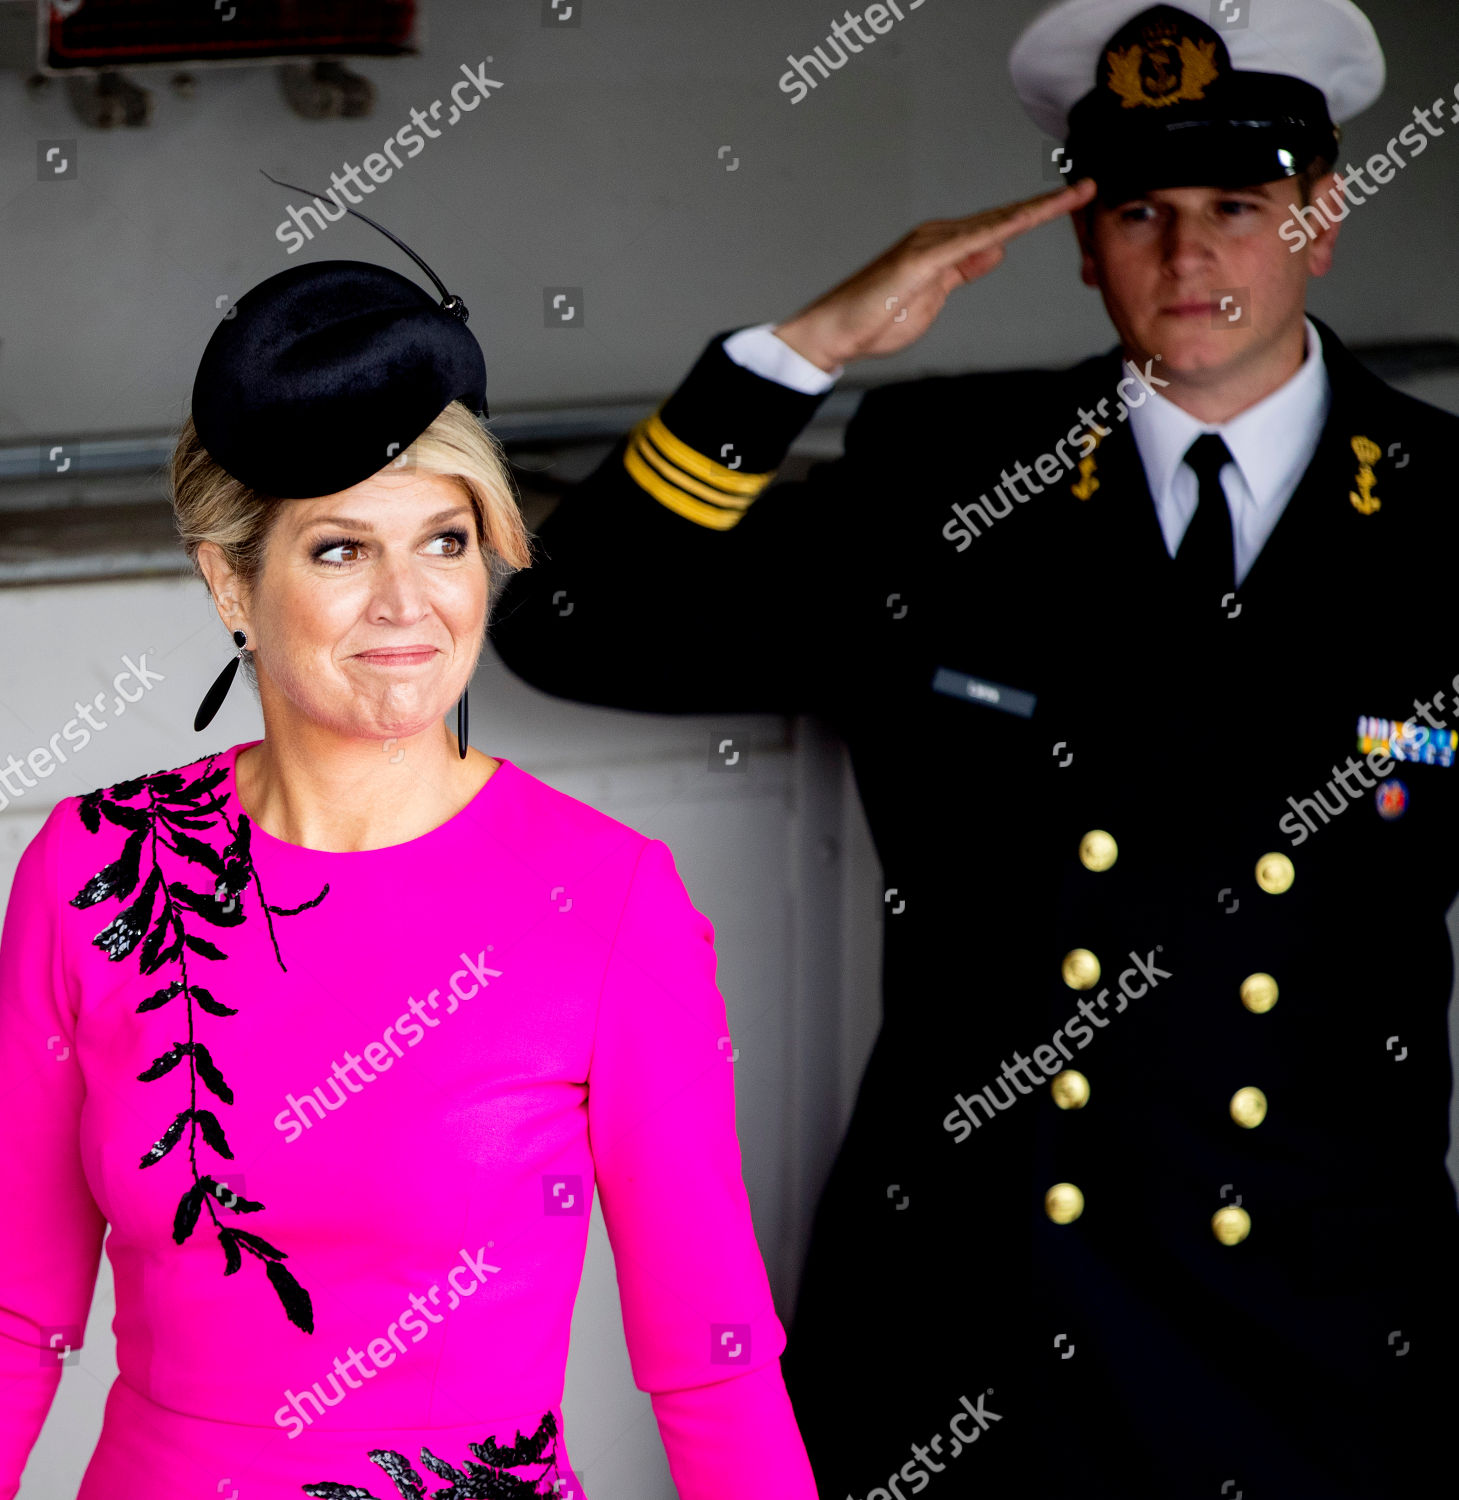 state-visit-of-the-king-and-queen-of-the-netherlands-london-uk-shutterstock-editorial-9943238bg.jpg